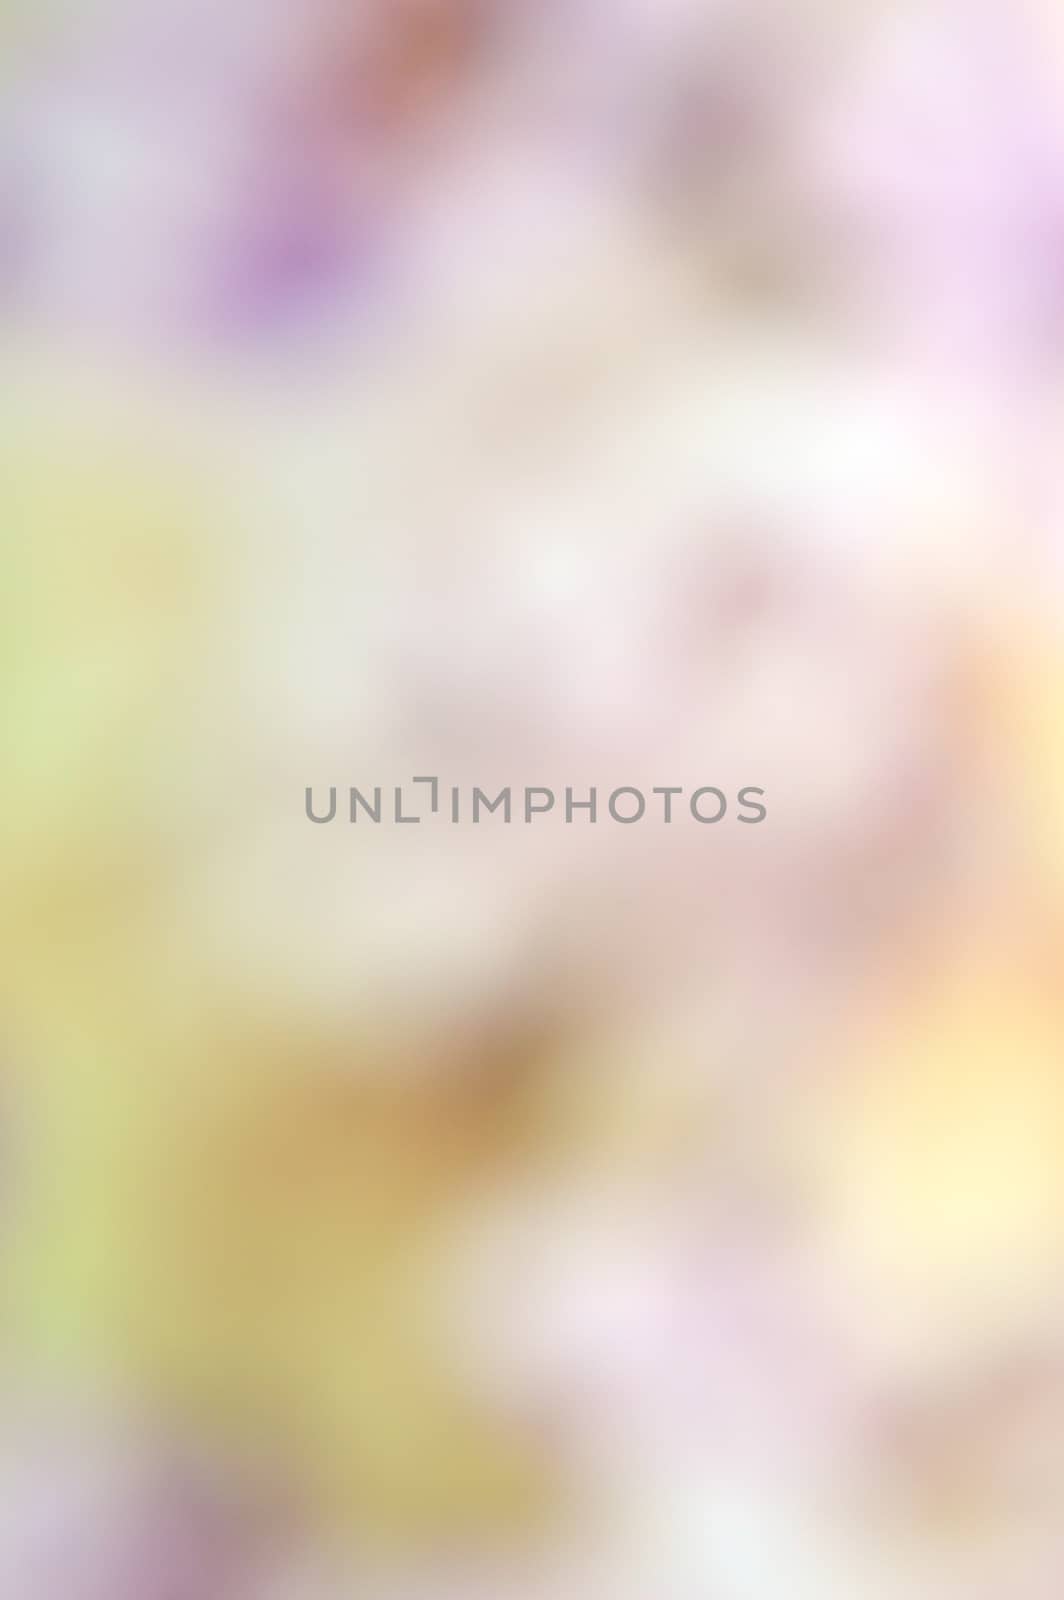 abstract color blur background, concept nature